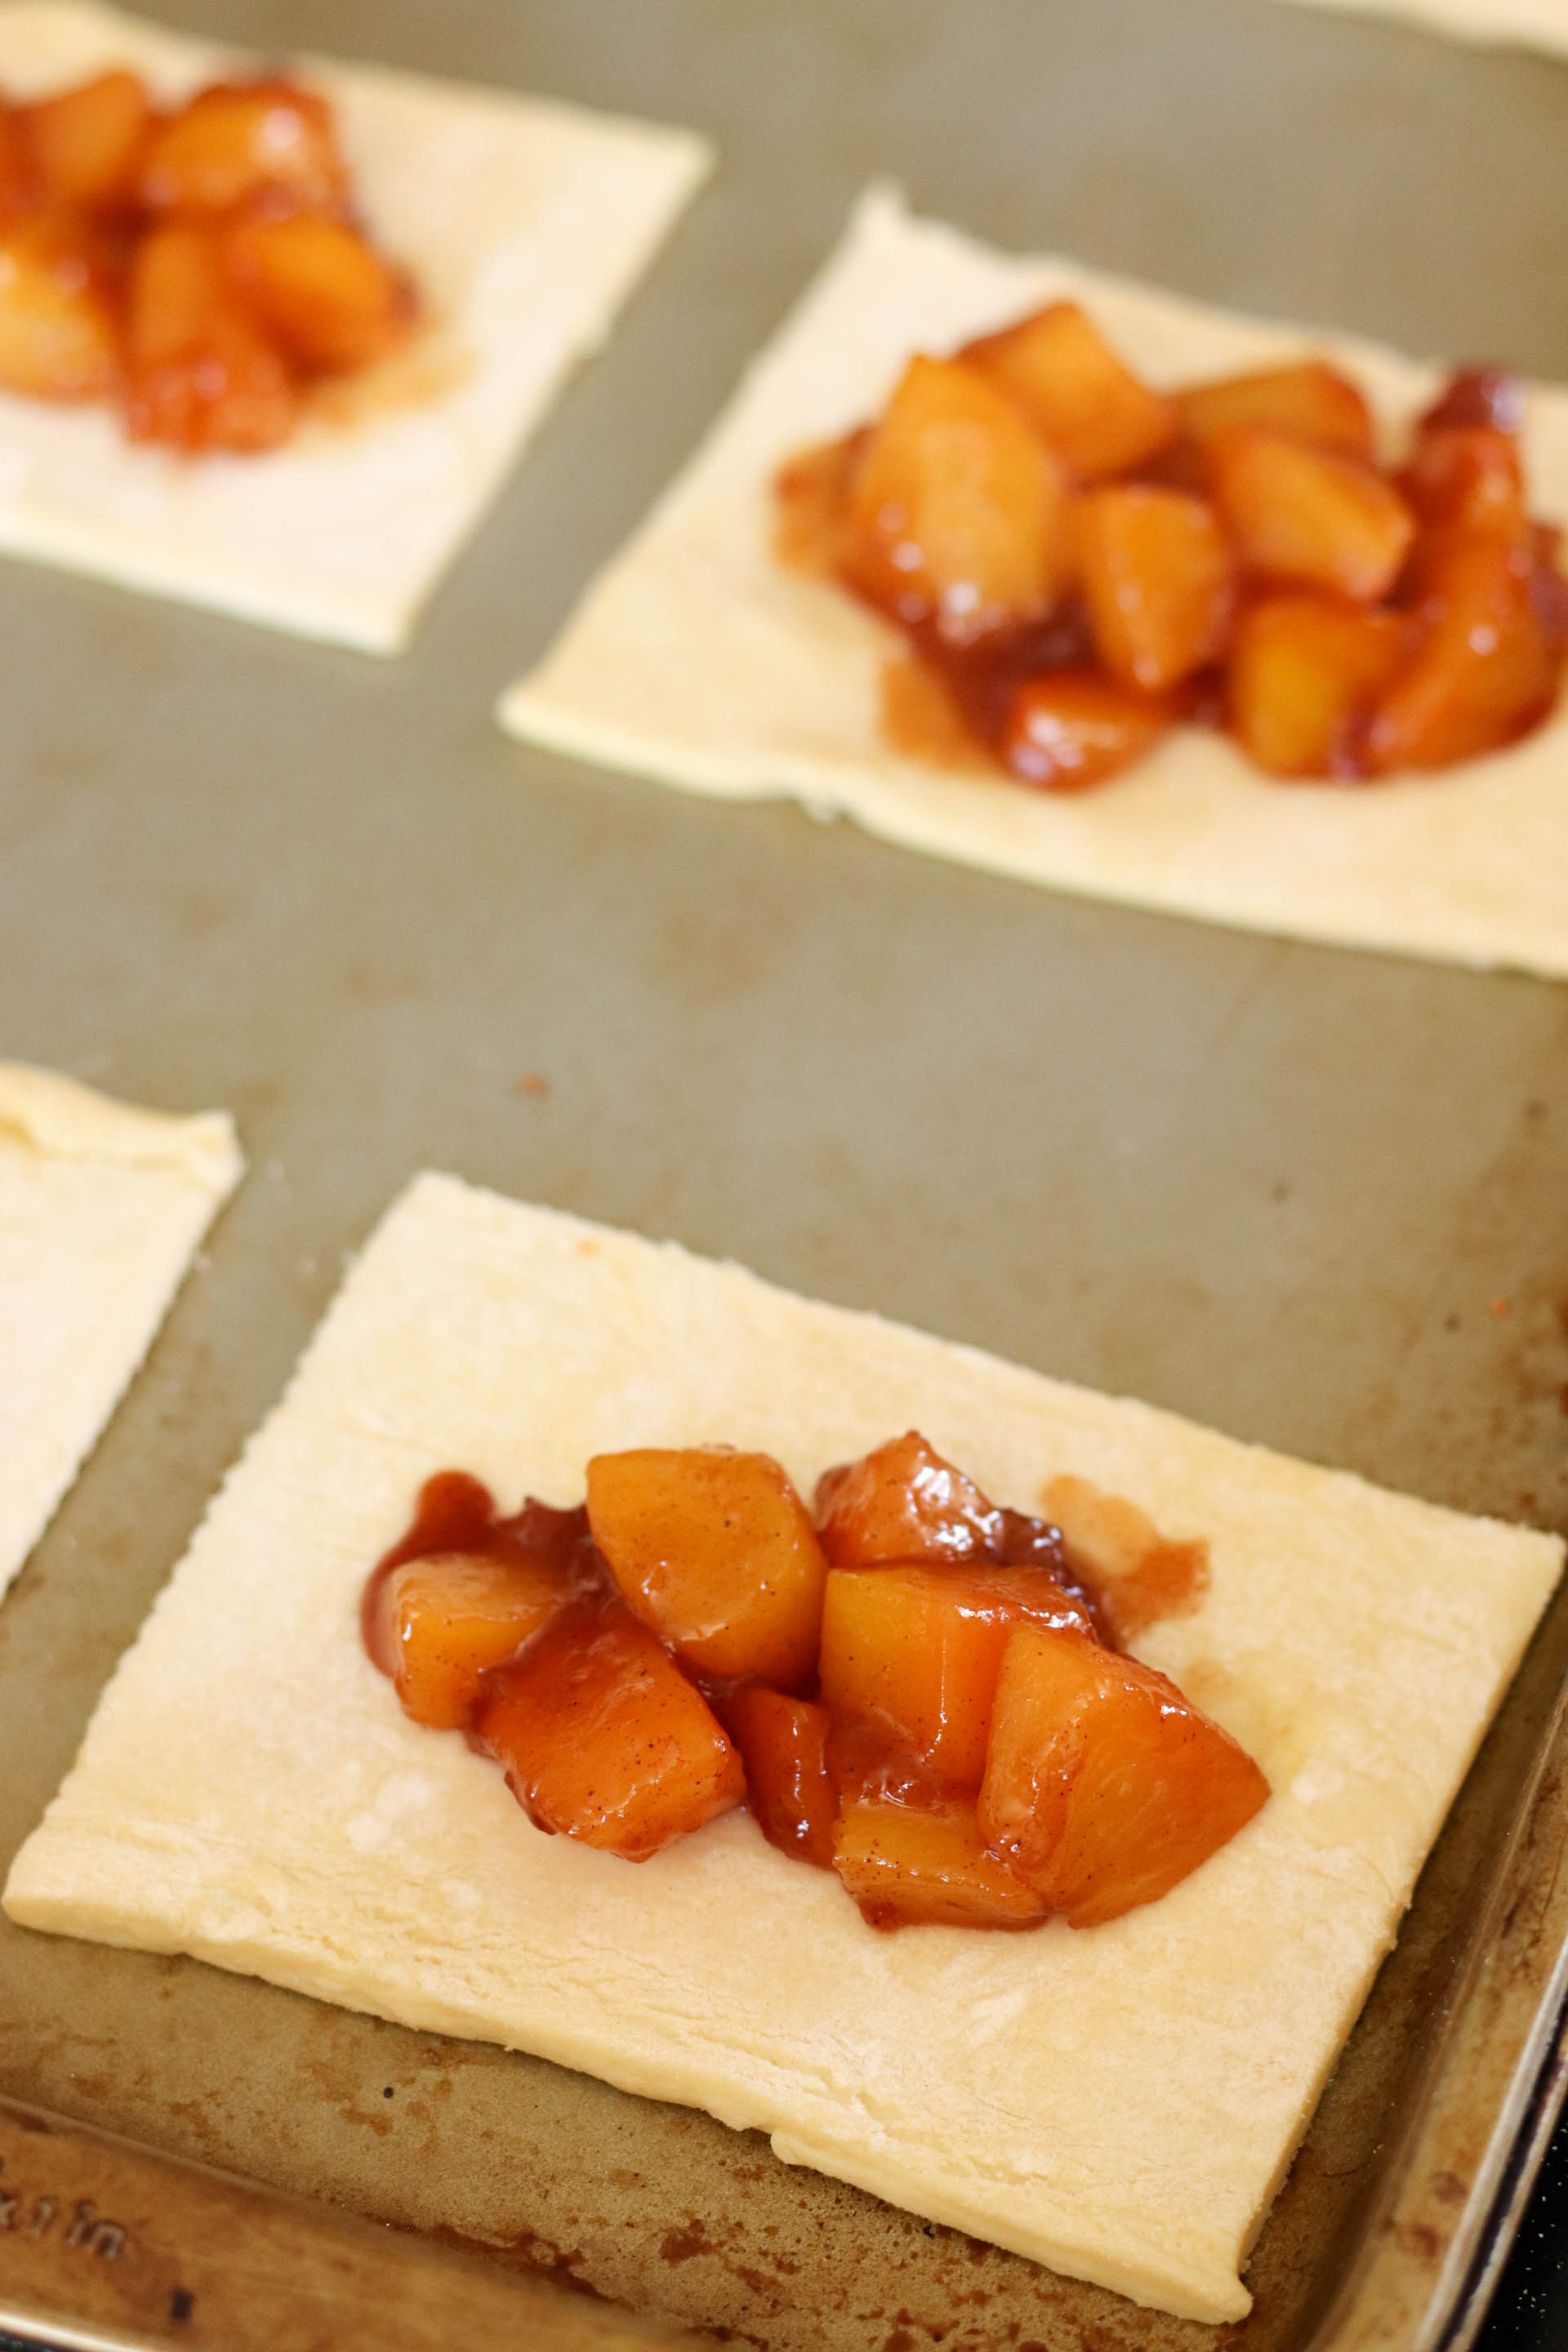 Peach mixture on top of Puff Pastry